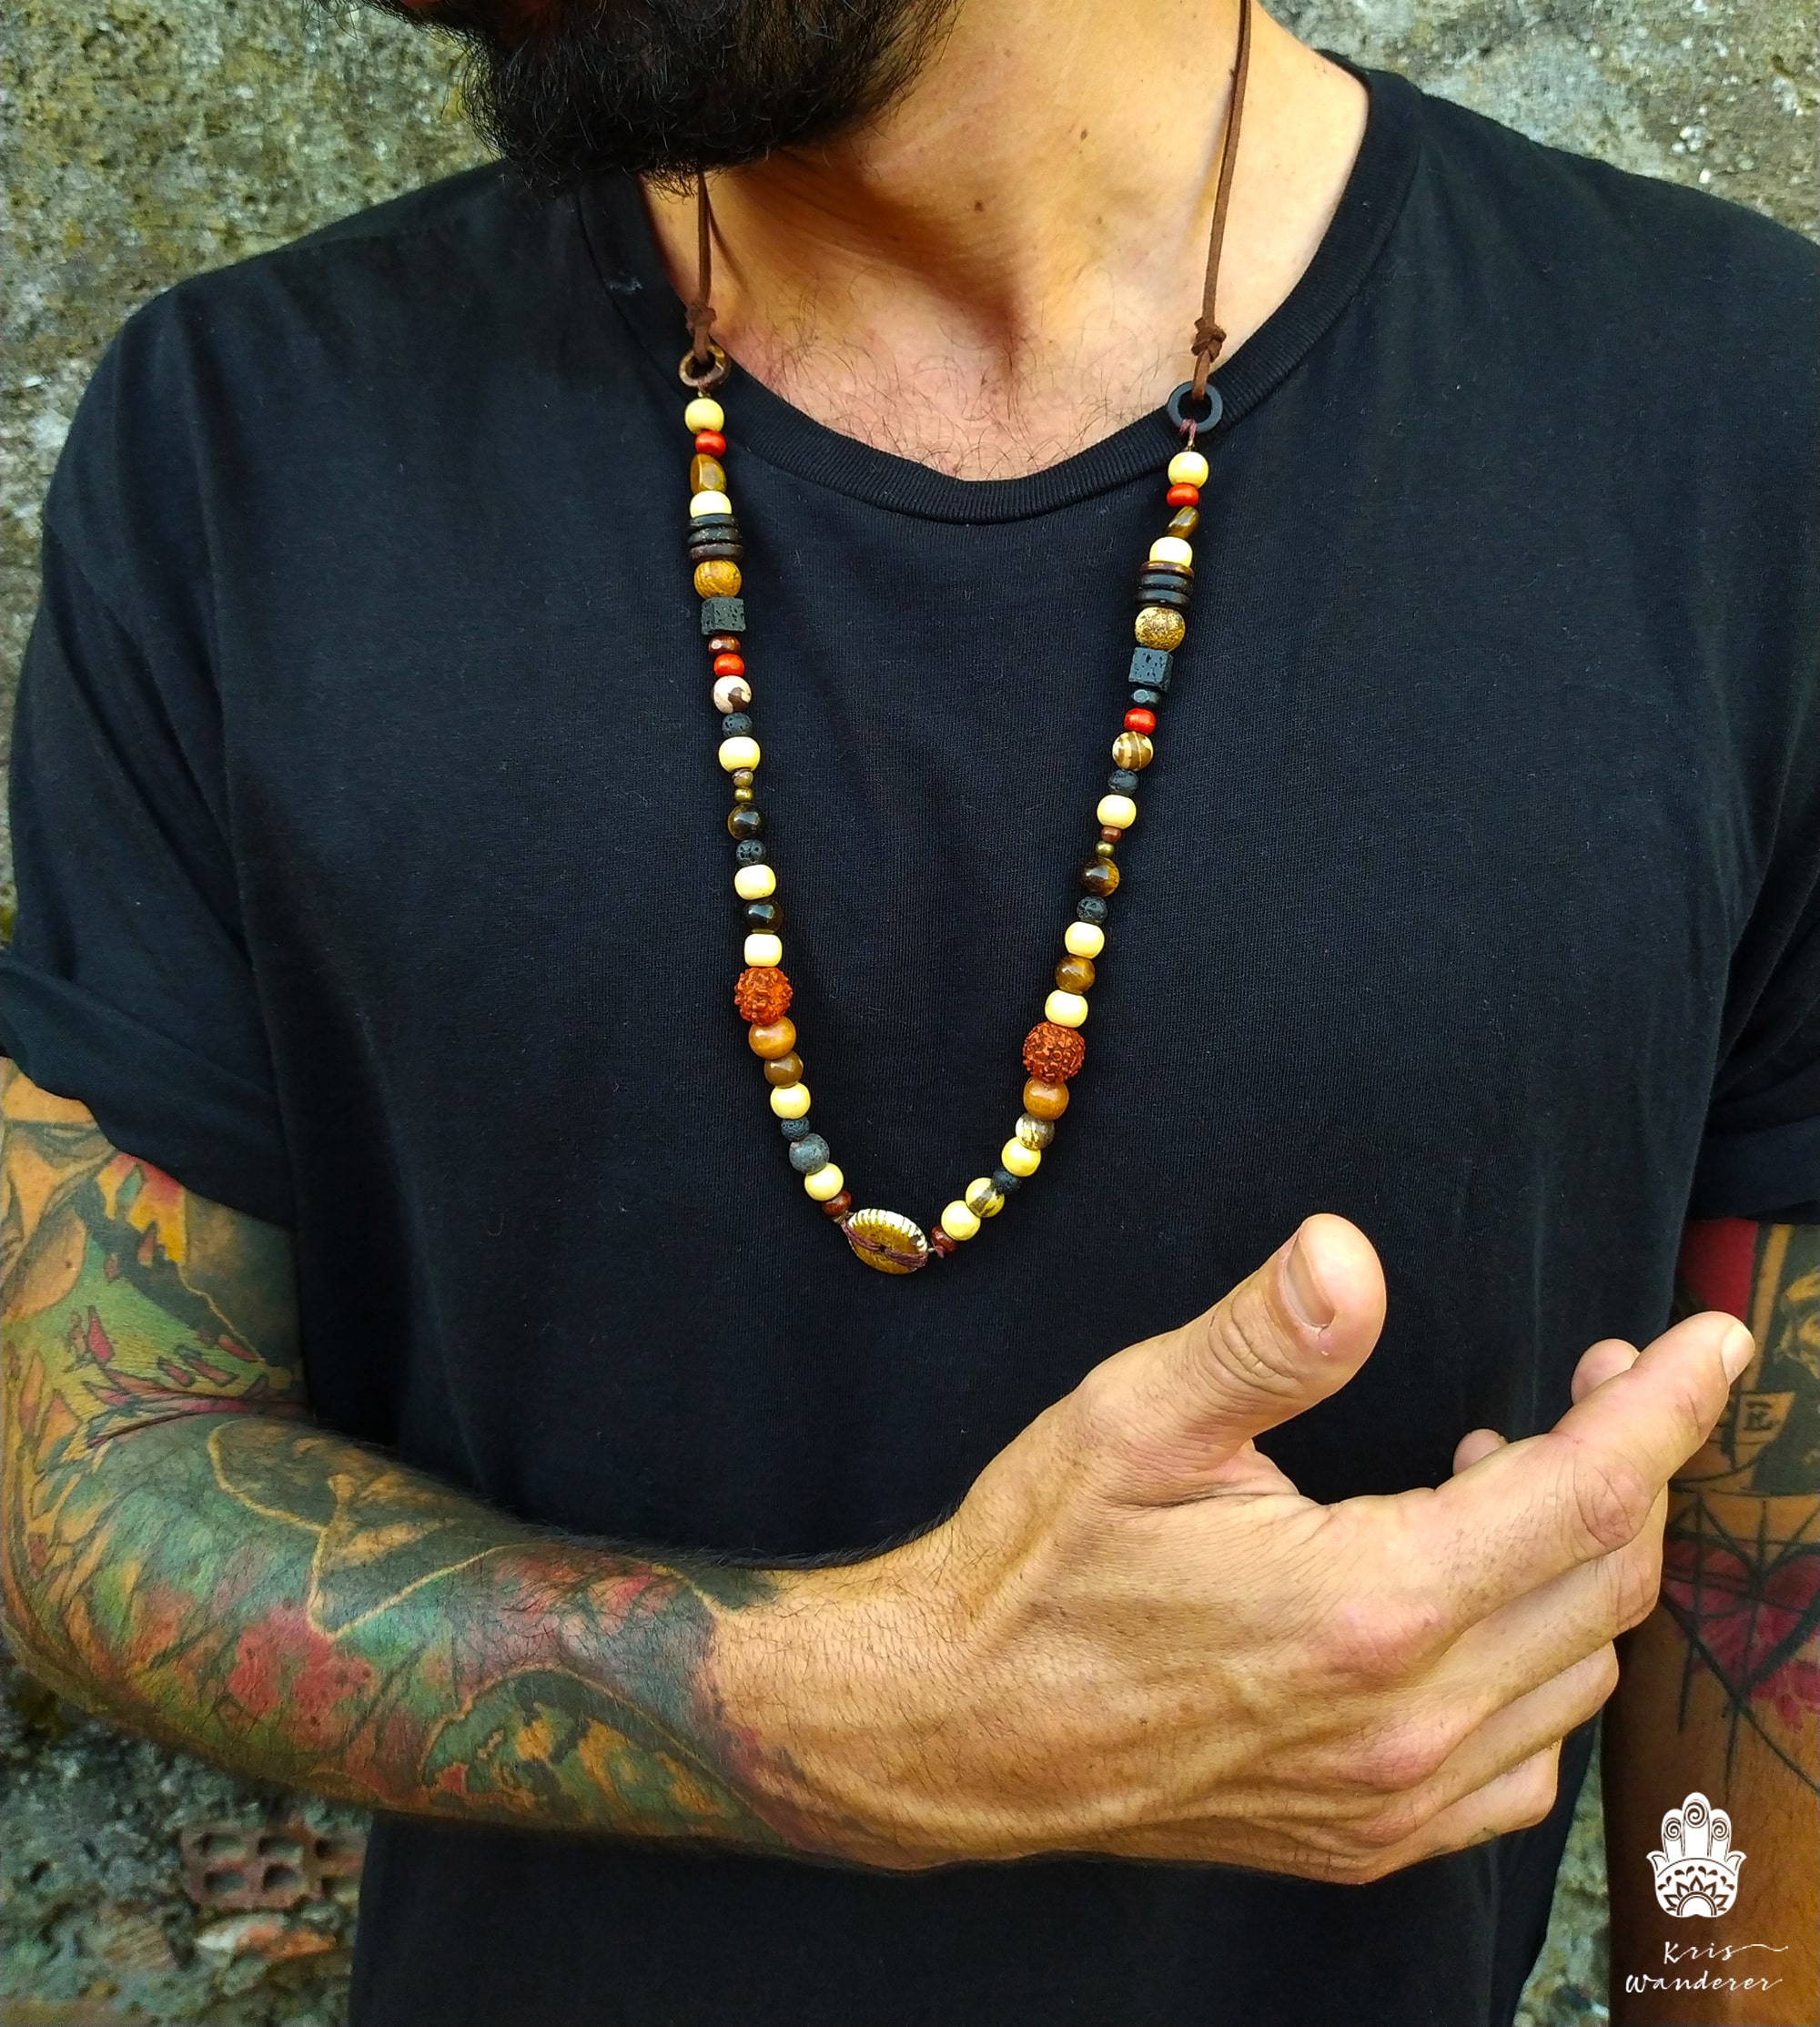 Wooden Beads Antique Necklace - Fashionvalley-tuongthan.vn